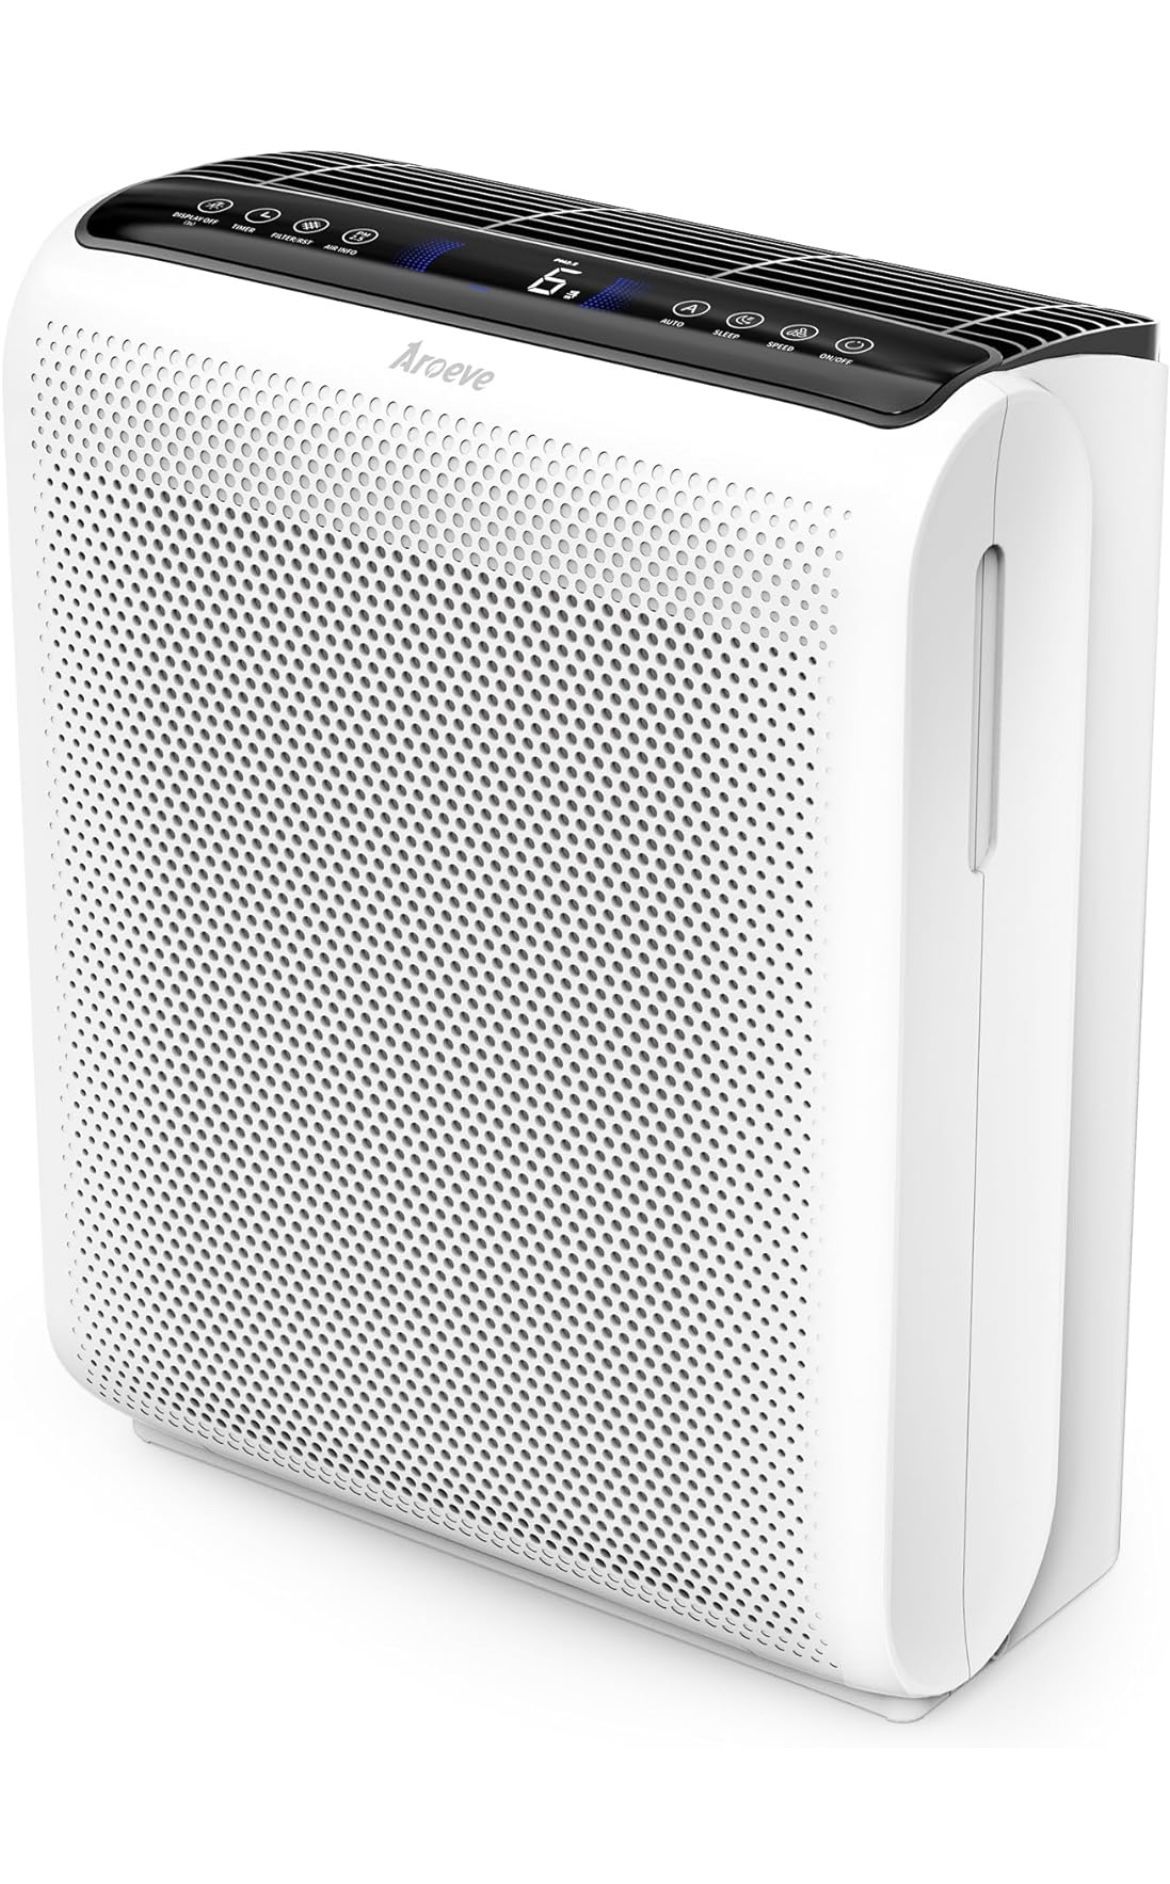   AROEVE Air Purifiers For Home Large Room Up to 1395 Sq Ft with Air Quality Laser Sensors, HEPA Filter, Washable Filters, Filters Reg. Retail $129.99